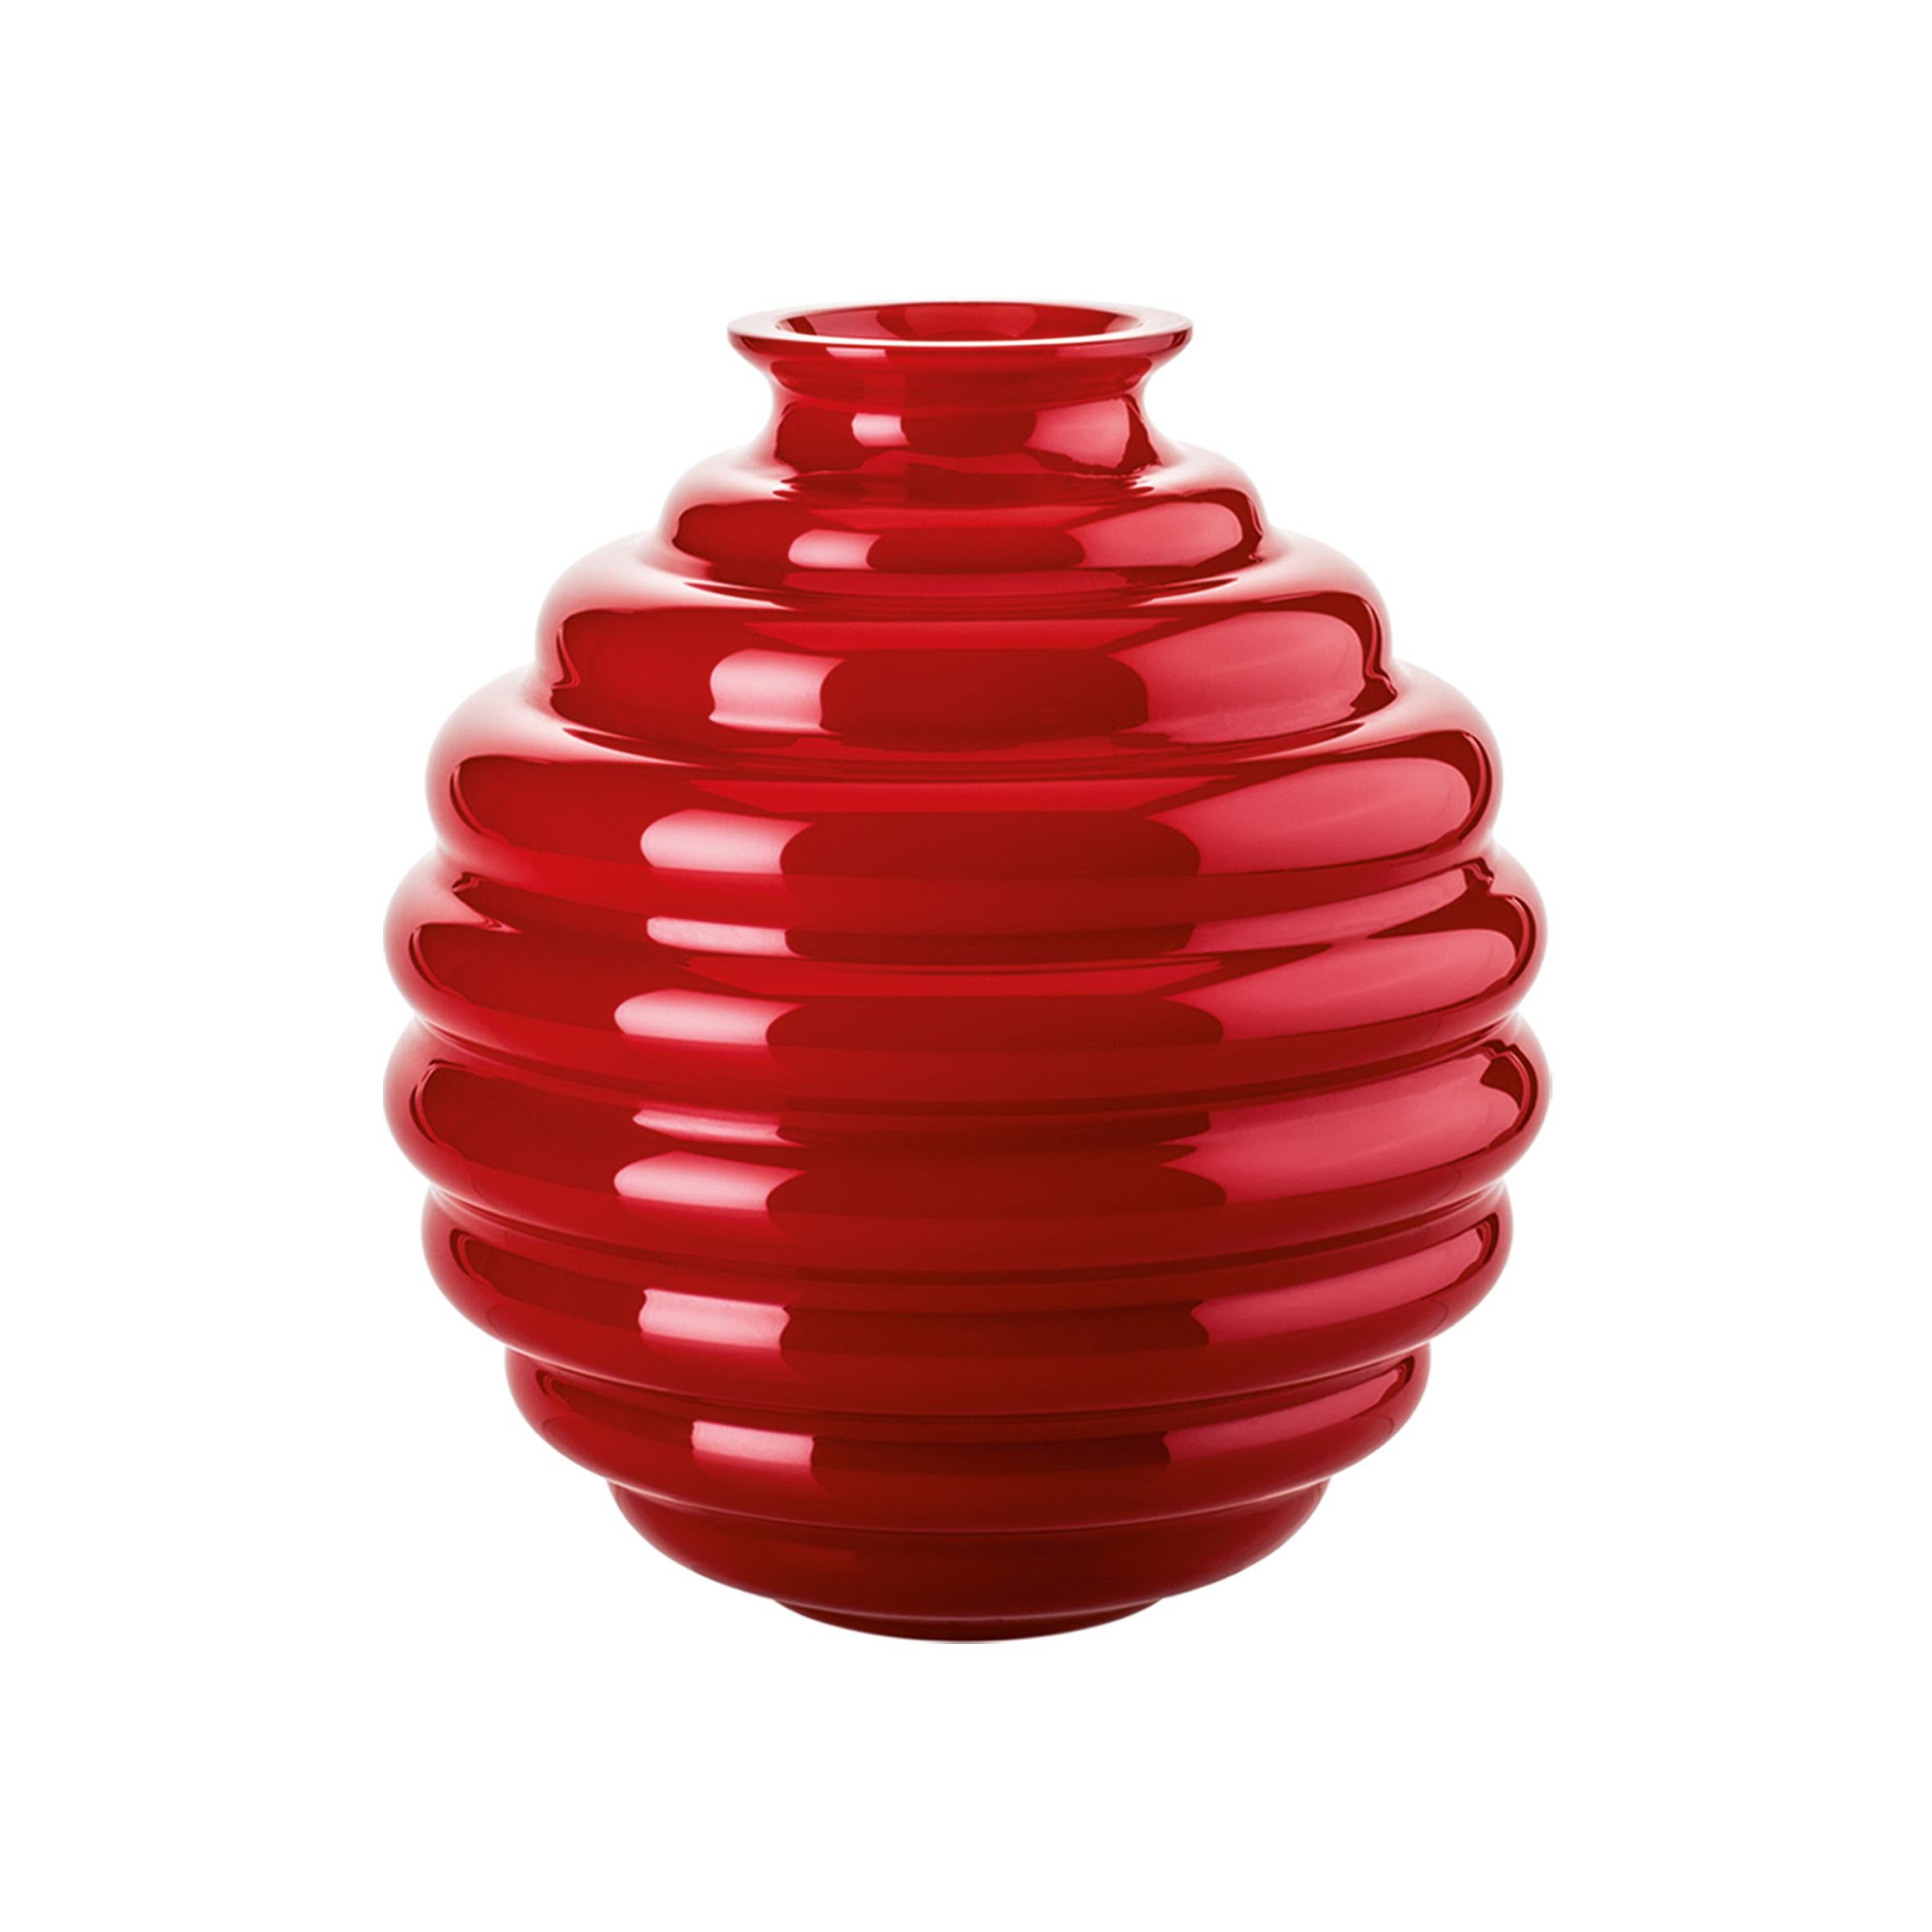 Venini glass vase in red designed by Napoleone Martinuzzi in 1930. Perfect for indoor home decor as container or statement piece for any room. Also available in other colors on 1stdibs.

Dimensions: 26 cm diameter x 29 cm height.